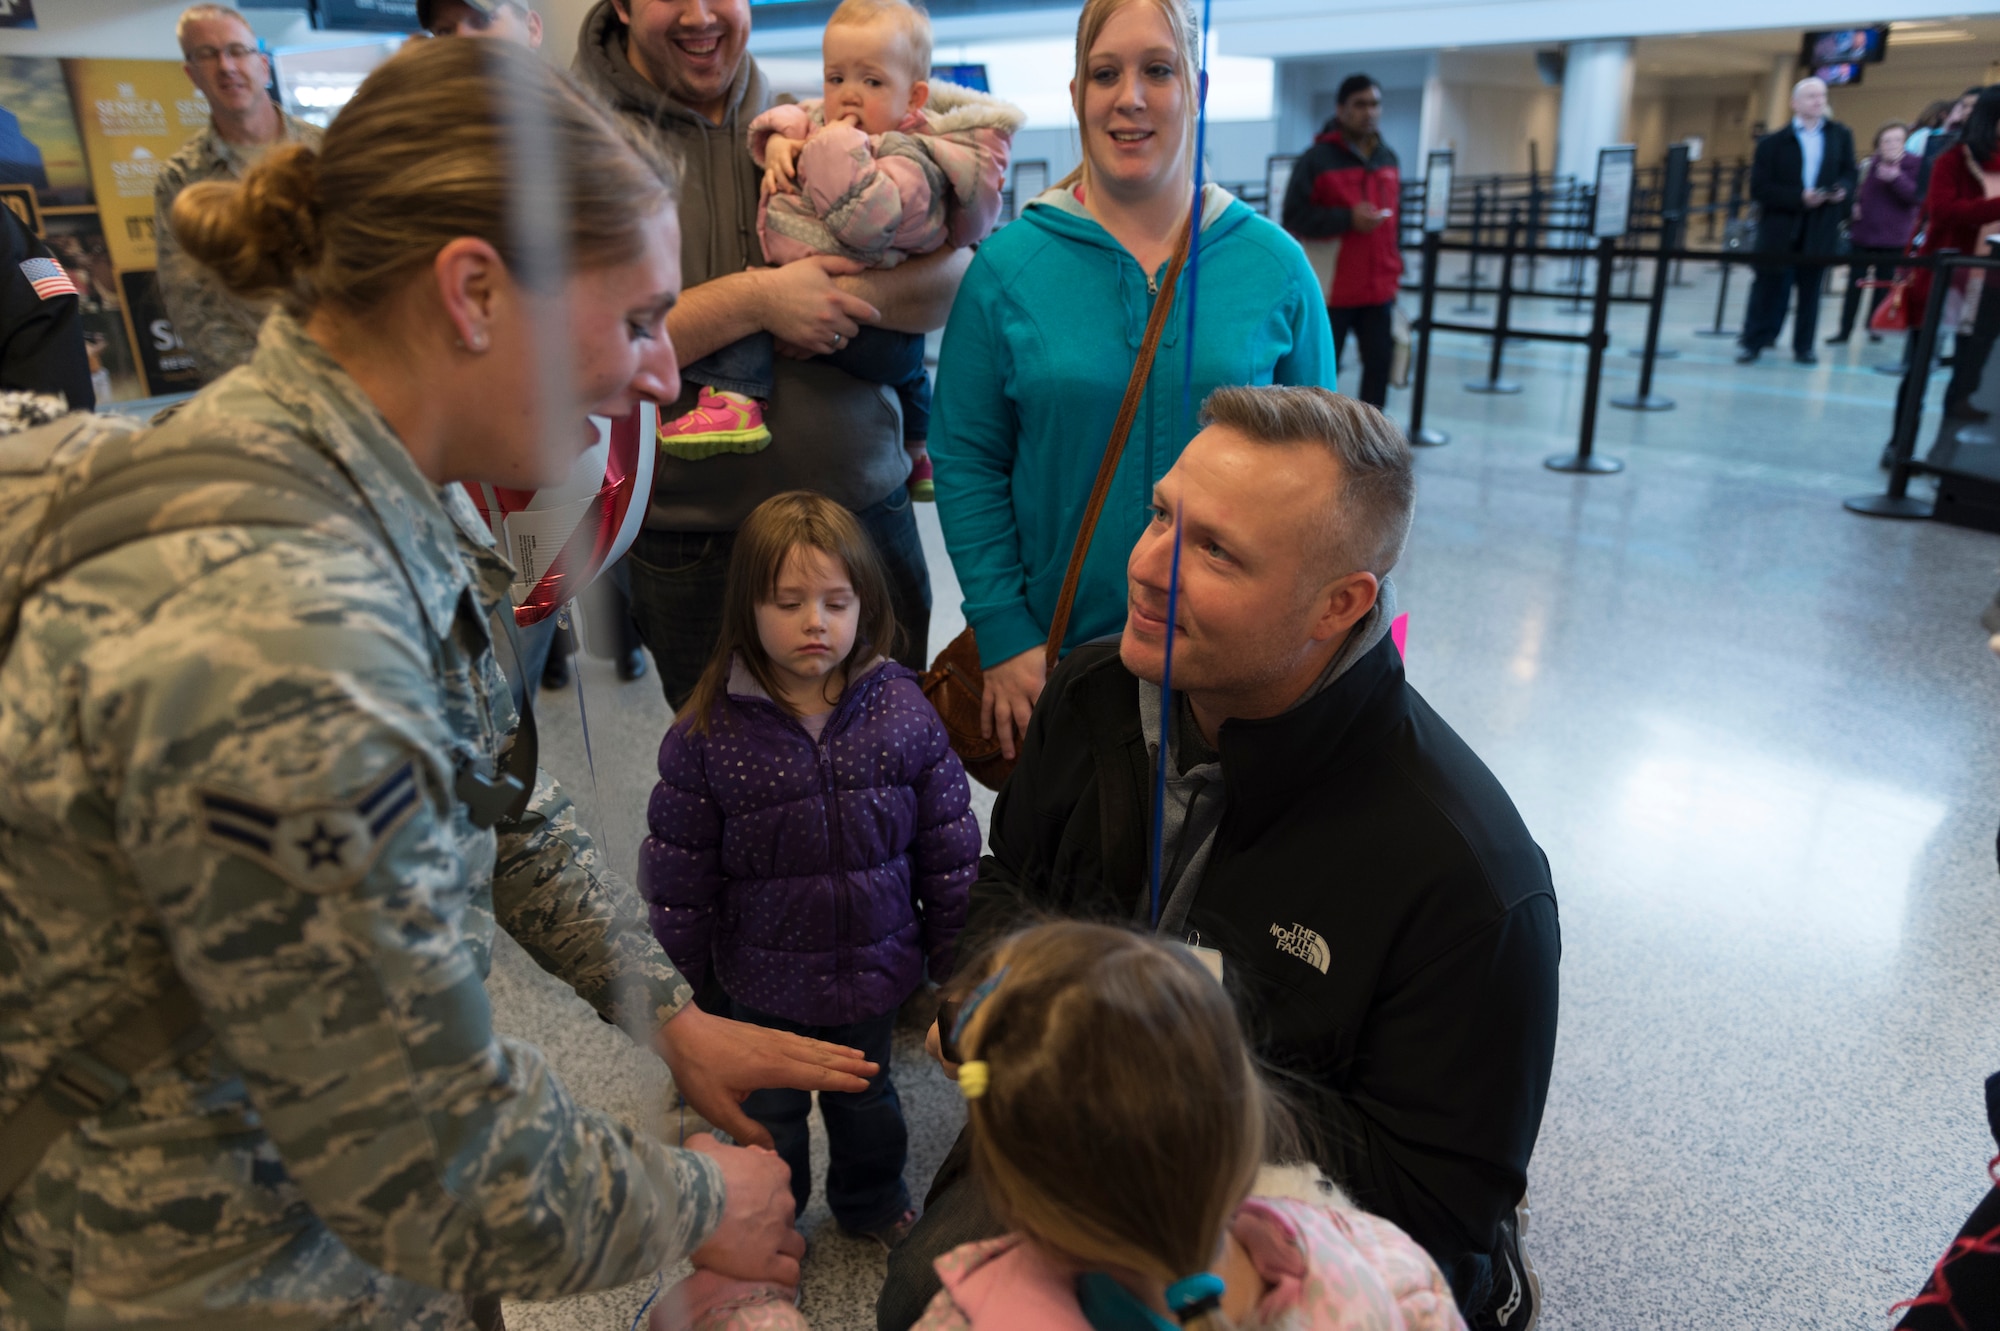 Justin Jurs surprises Airman 1st Class Amanda Lavocat, an Airman assigned to the 107th Security Forces Squadron, Niagara Falls Air Reserve Station, N.Y., by proposing to her upon her arrival home from a deployment. Lavocat was one of more than 30 Airmen from the 107th SFS to return from a six-month deployment to Southwest Asia, Feb. 4-5, 2016. (U.S. Air National Guard photo by Staff Sgt. Ryan Campbell/Released)